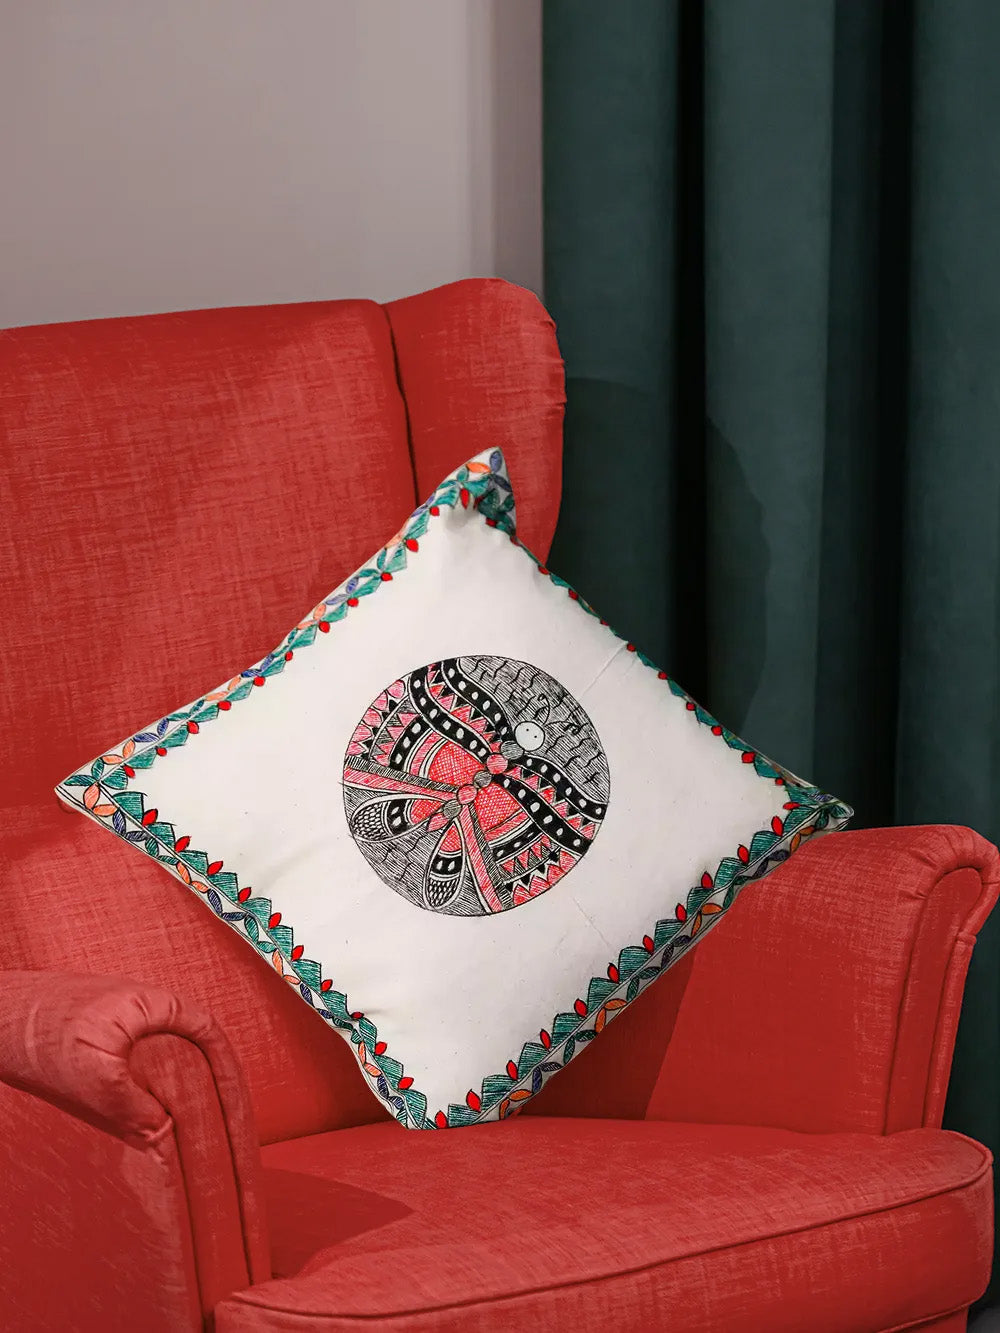 Hand Painted Red & Black Design Madhubani Cushion Cover Pack Of 5